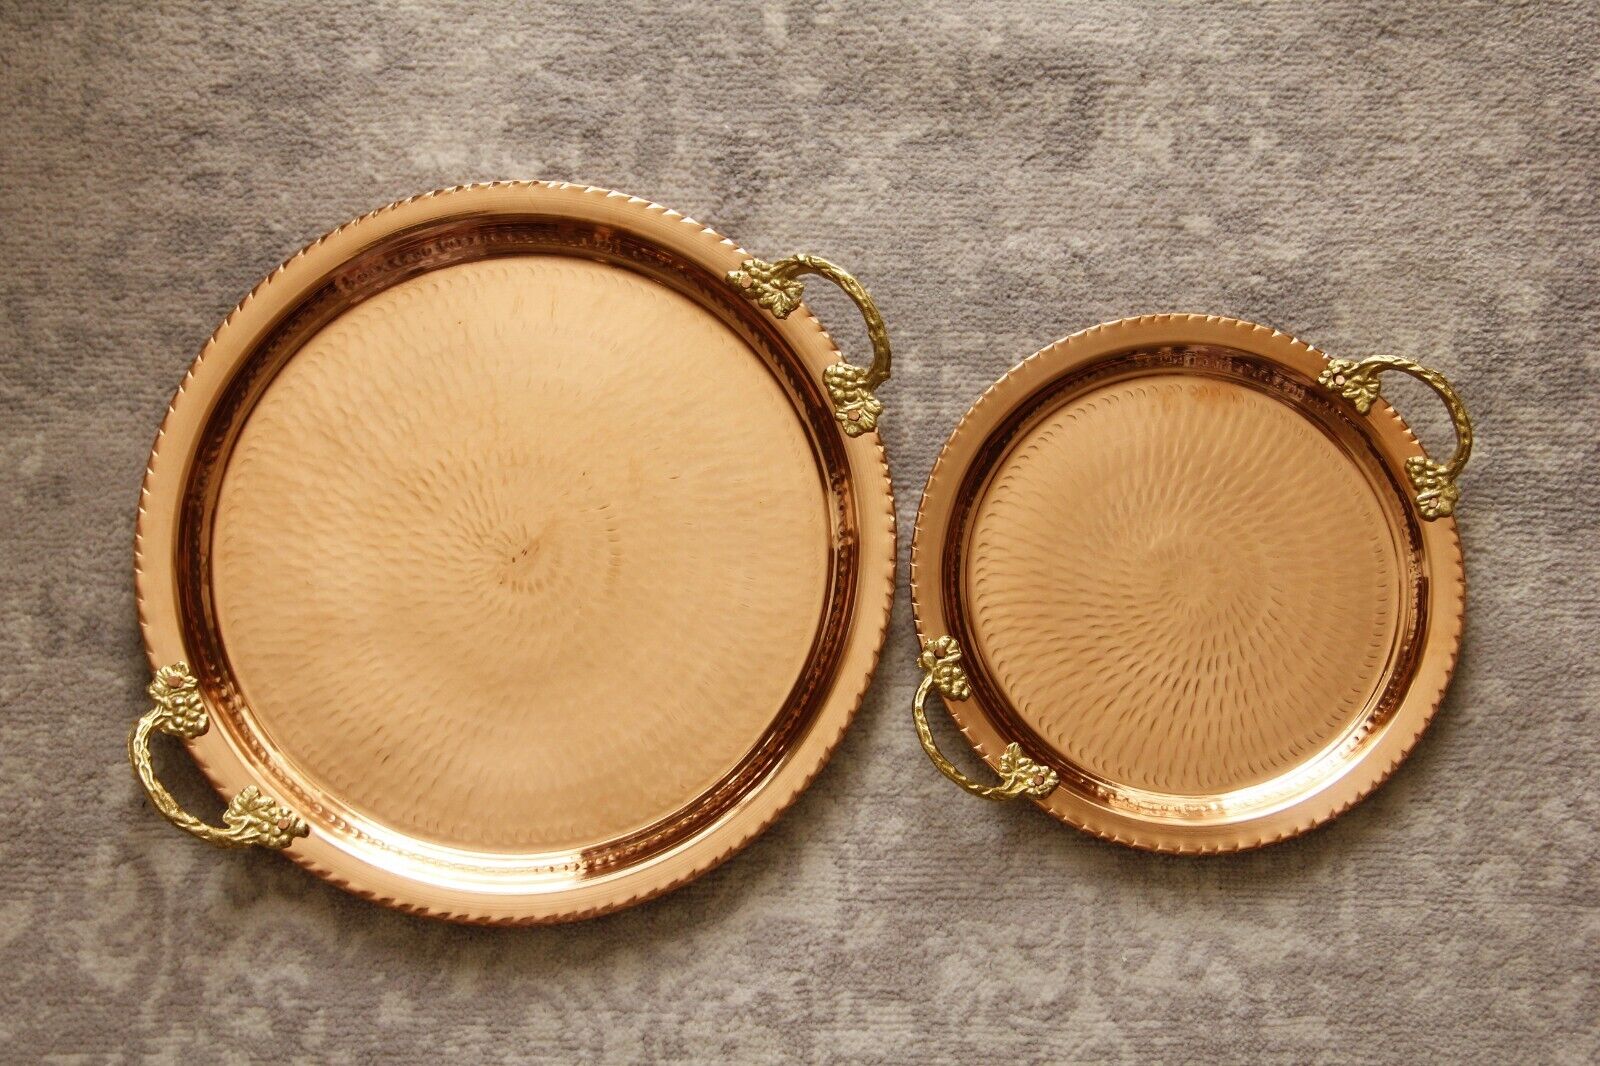 Handmade Copper Serving Tray, Round Tray, Large Tray, Vintage Tray, Decorative